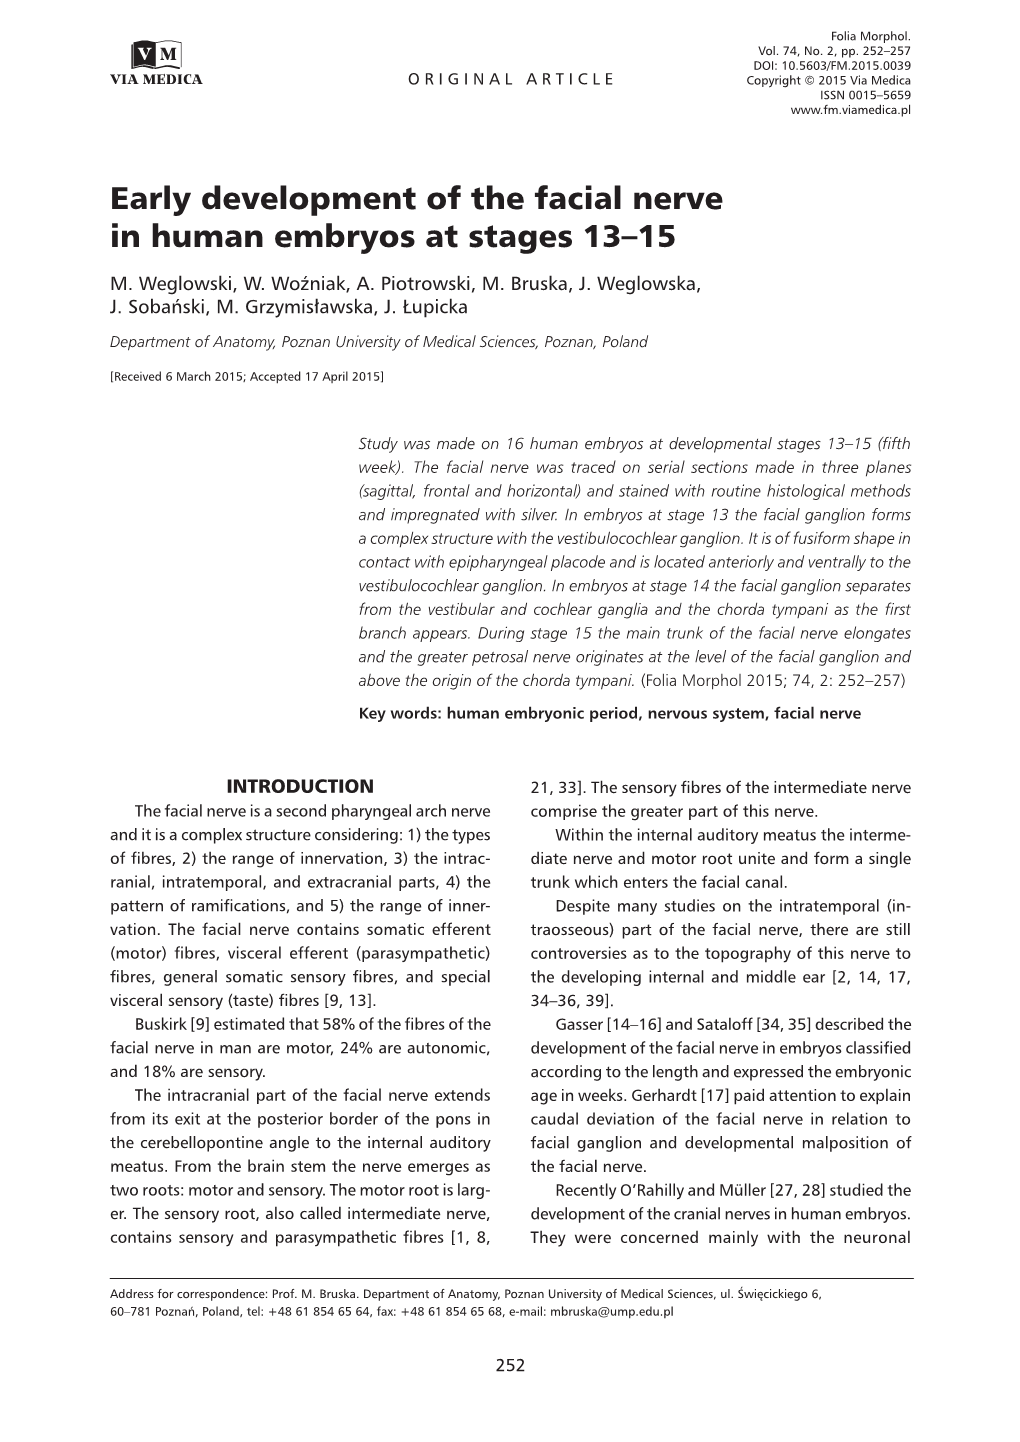 Early Development of the Facial Nerve in Human Embryos at Stages 13–15 M